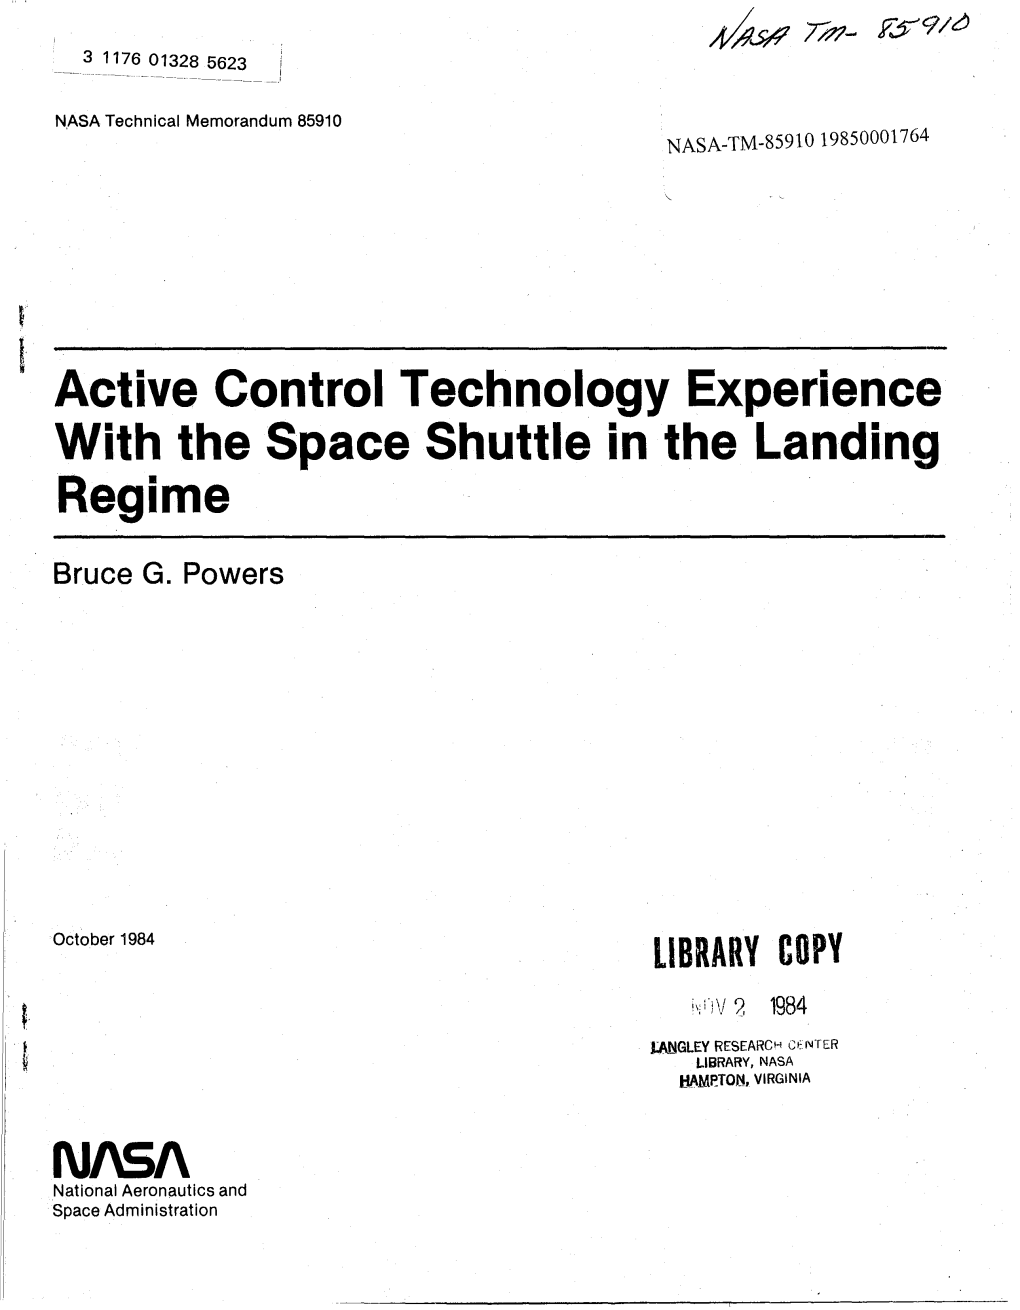 Active Control Technology Experience with the Space Shuttle in the Landing Regime